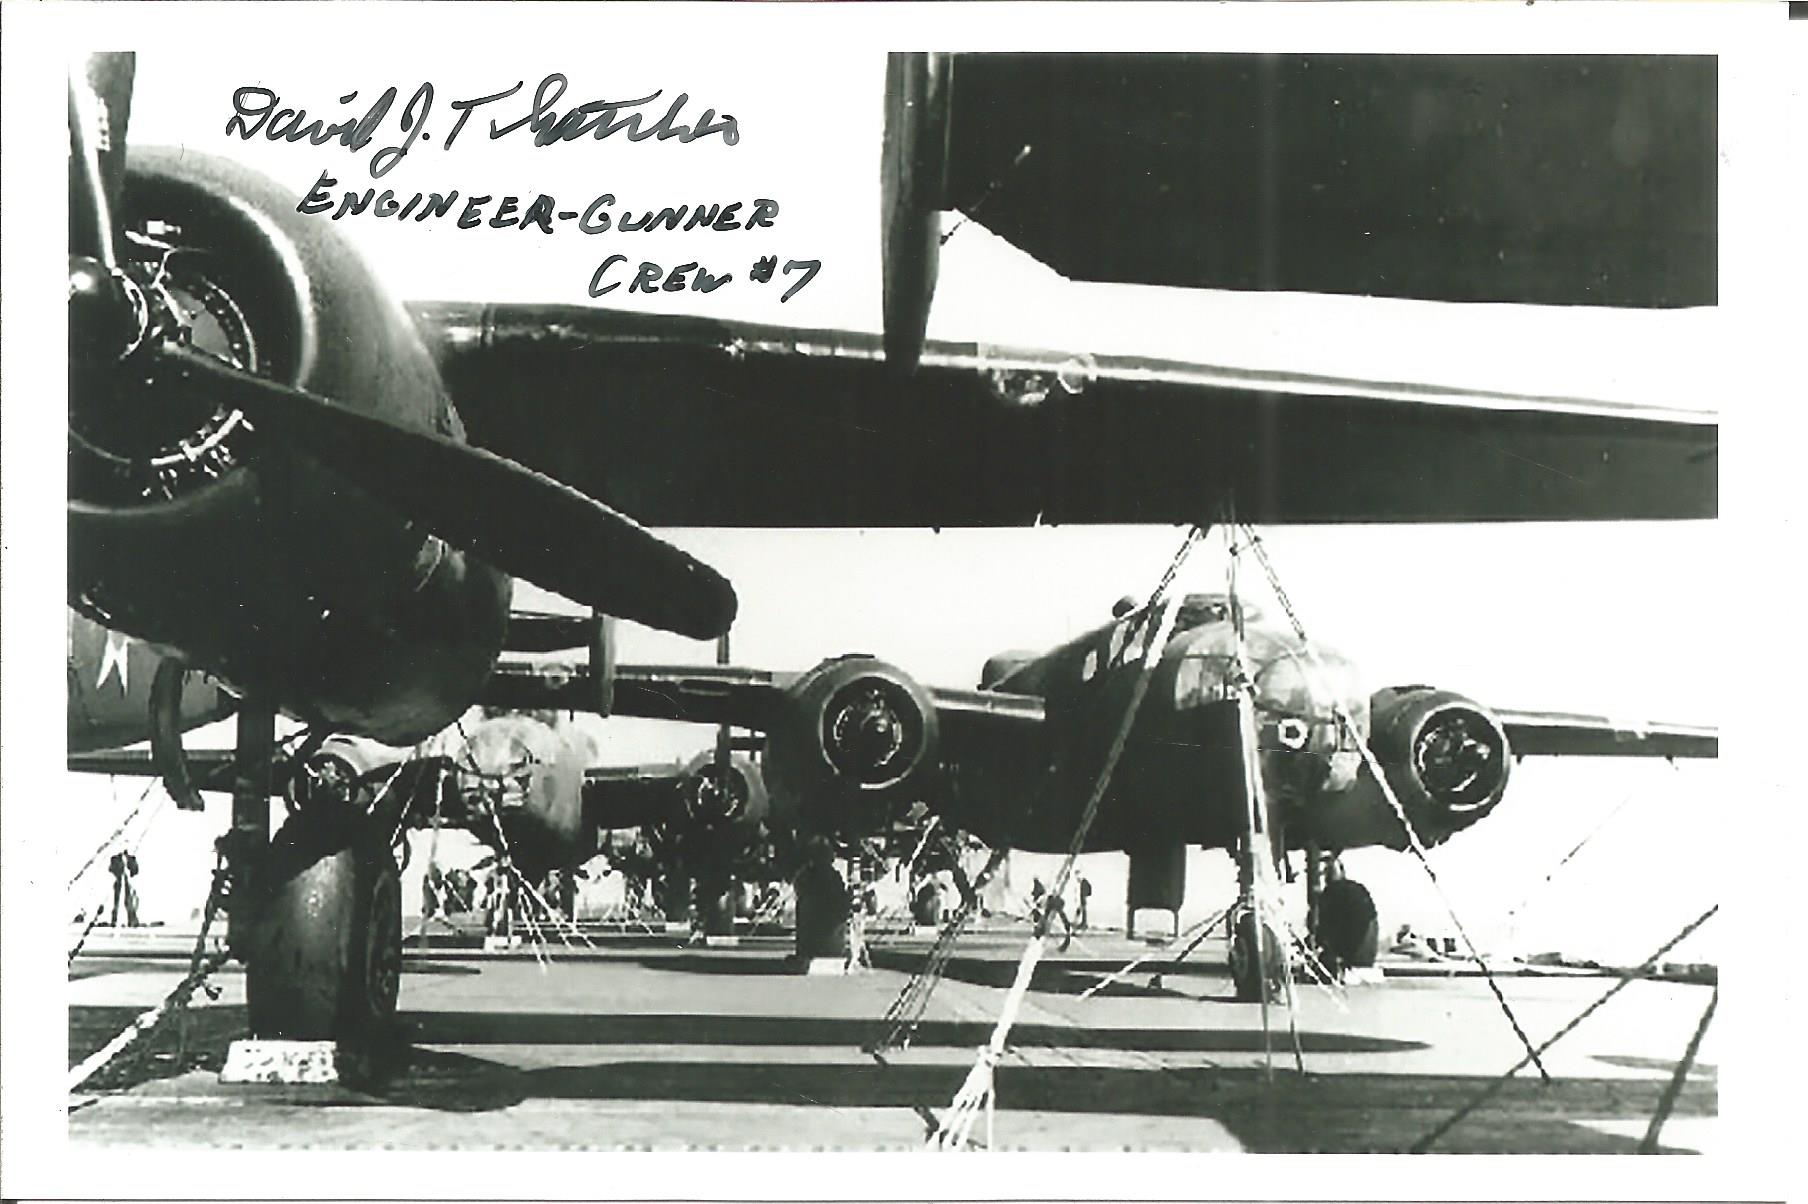 WW2 Doolittle Raider David Thatcher signed 6 x 4 inch b/w photo of bomber on the Aircraft carrier.